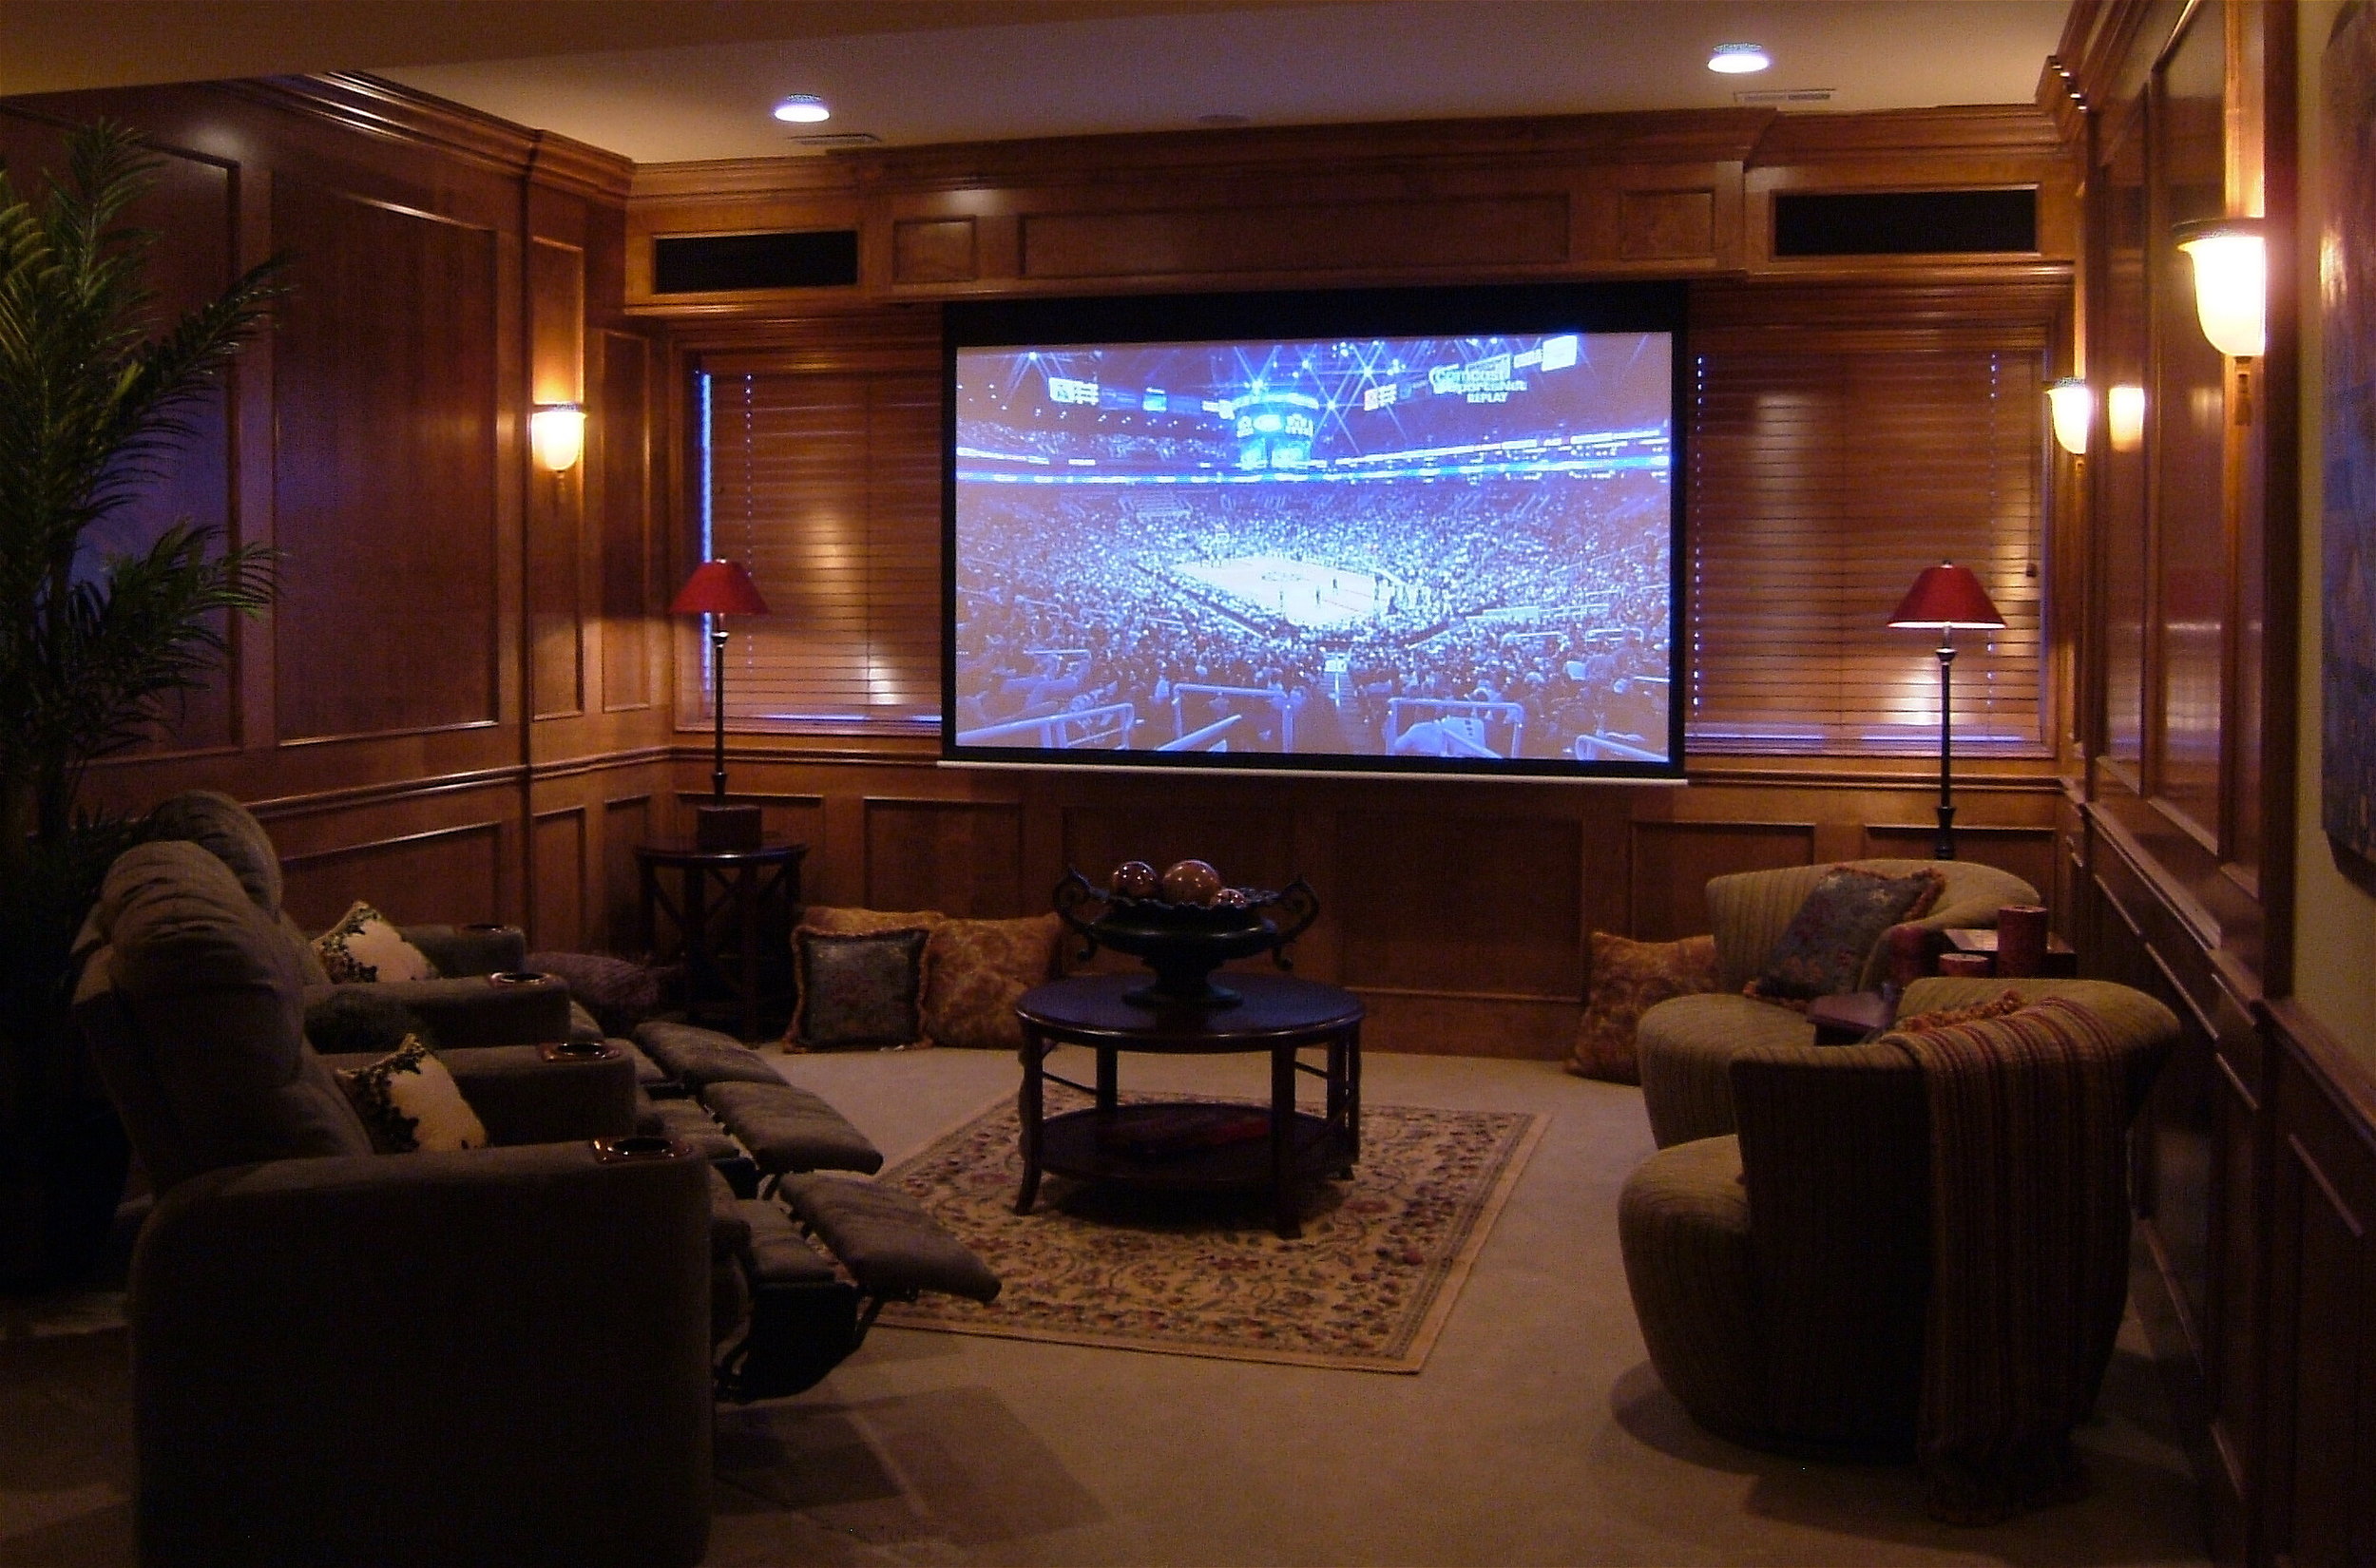 PRAIRIE LAKES SUBDIVSION IN ST. CHARLES IL FINSIHED BASEMENT THEATER ROOM BY SOUTHAMPTON